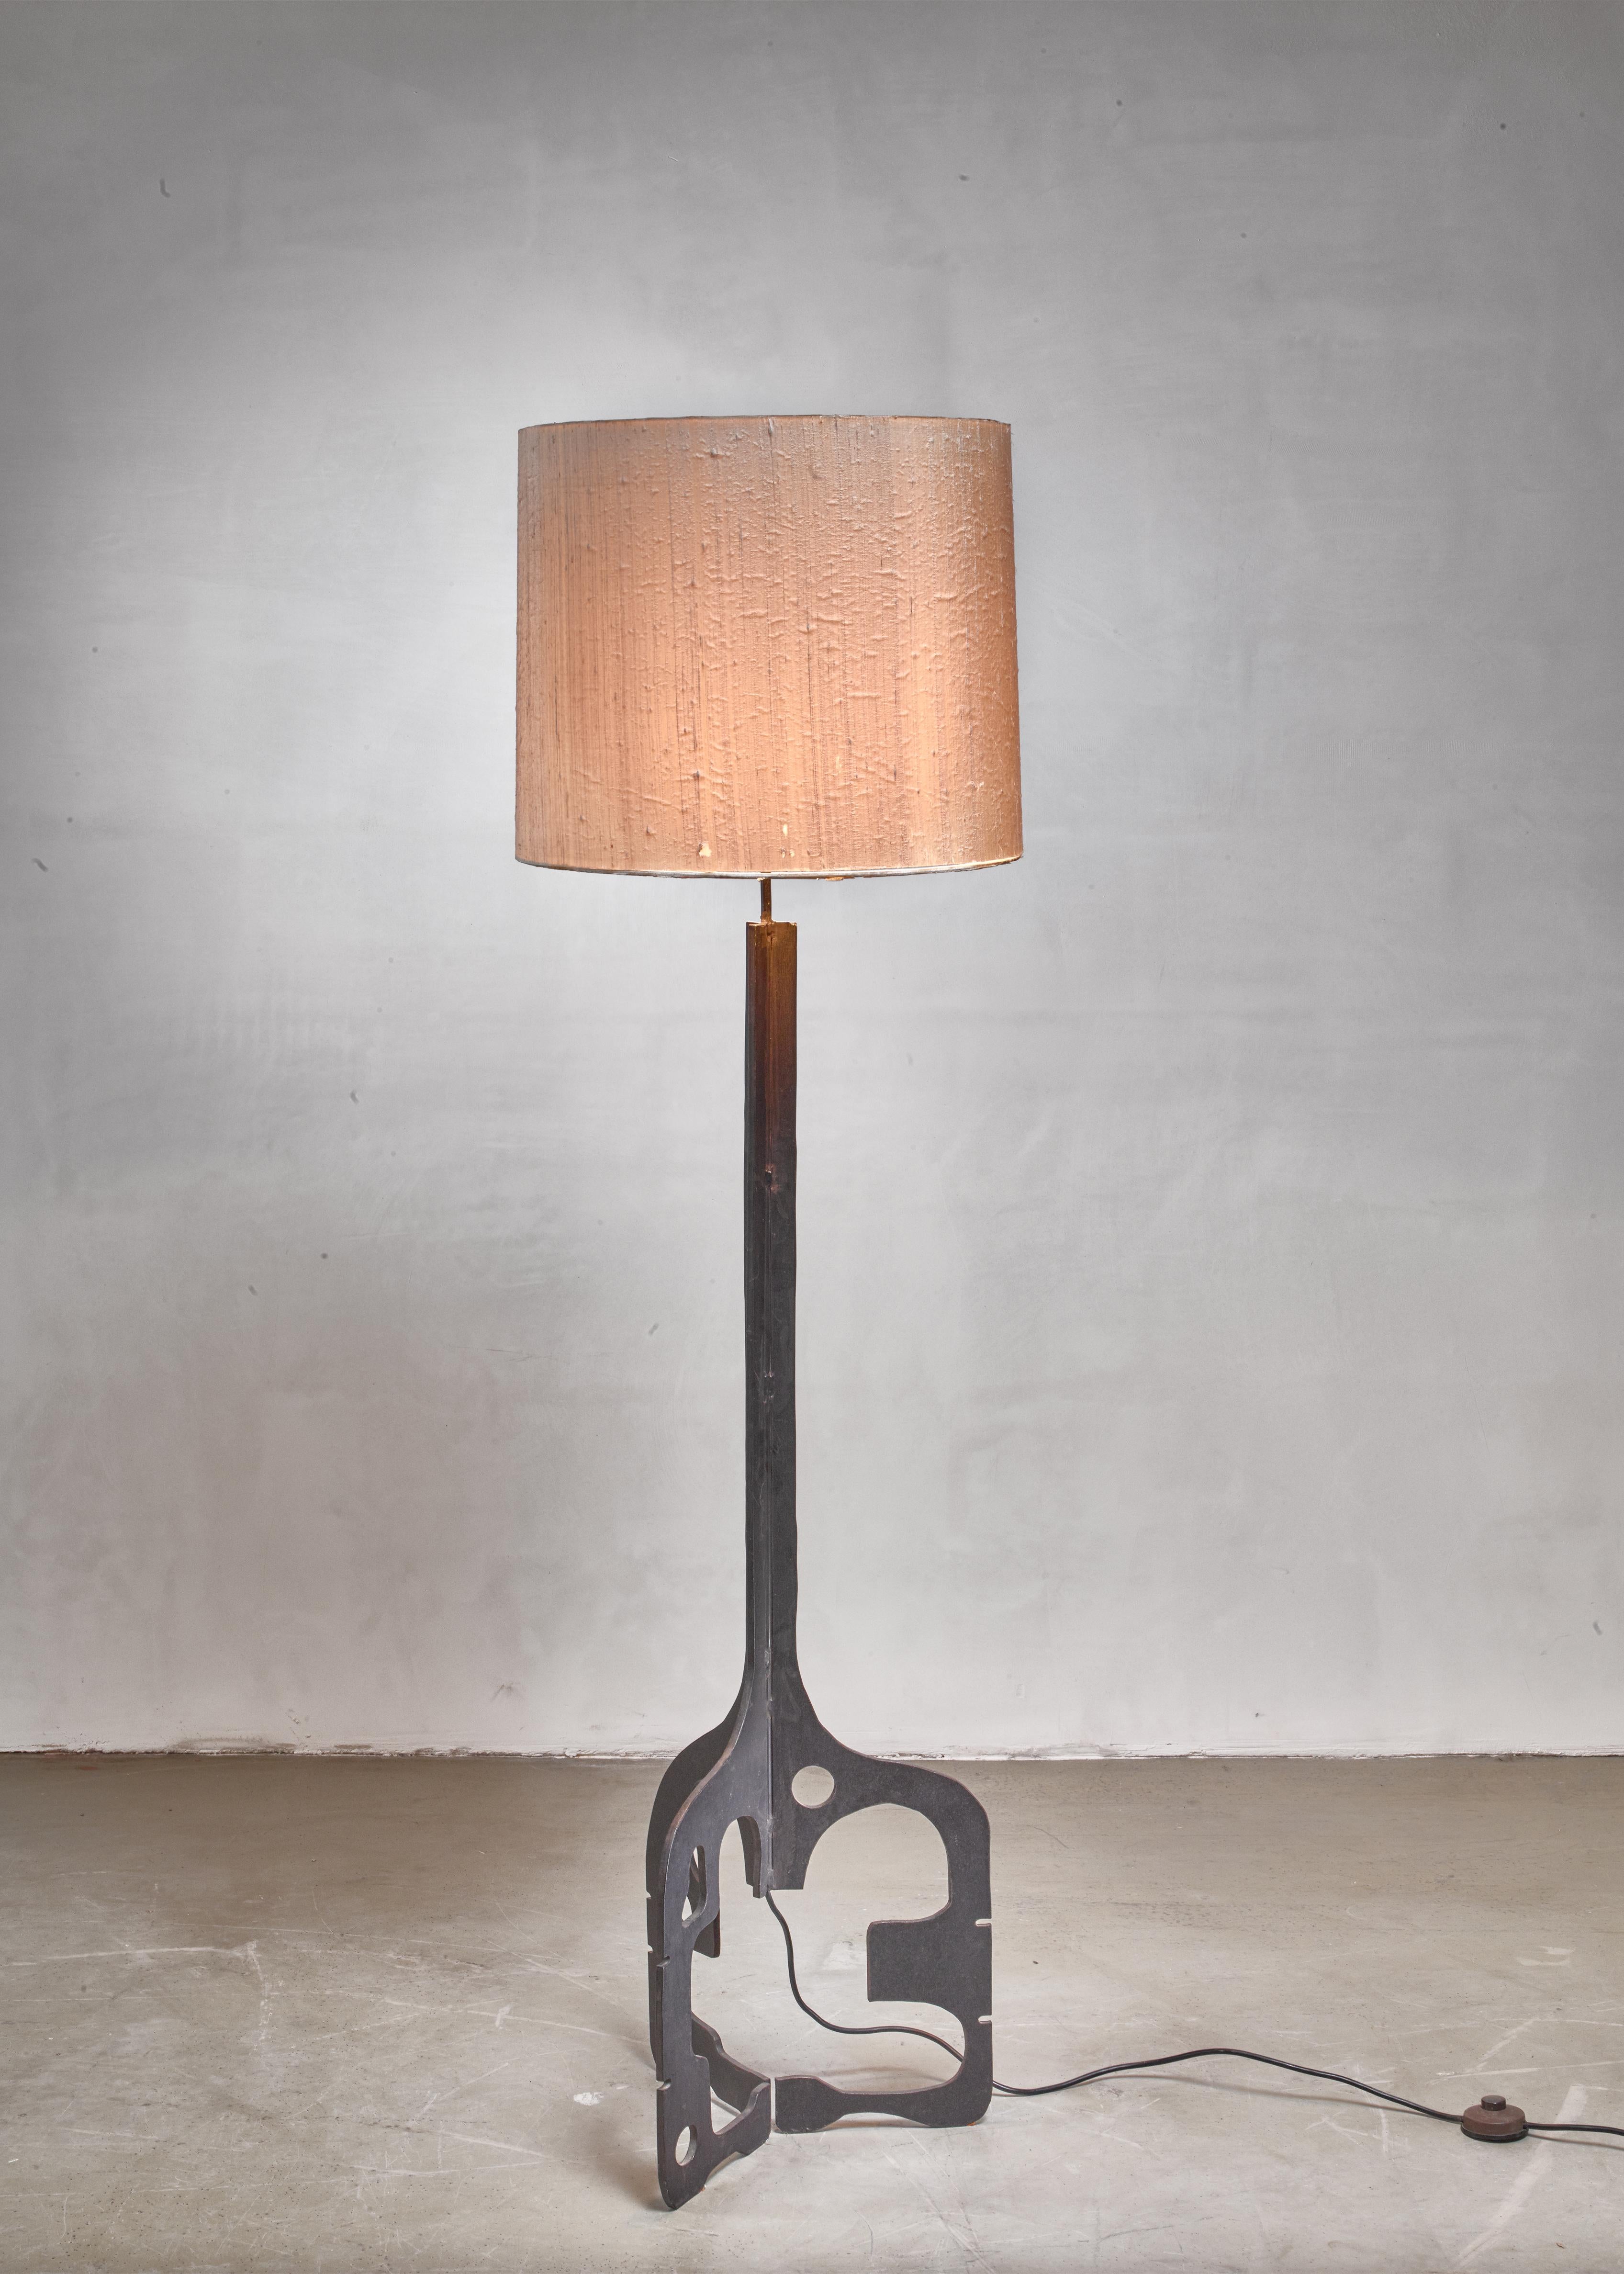 Mid-20th Century Iron Based Sculptural Floor Lamp, Germany, 1950s For Sale